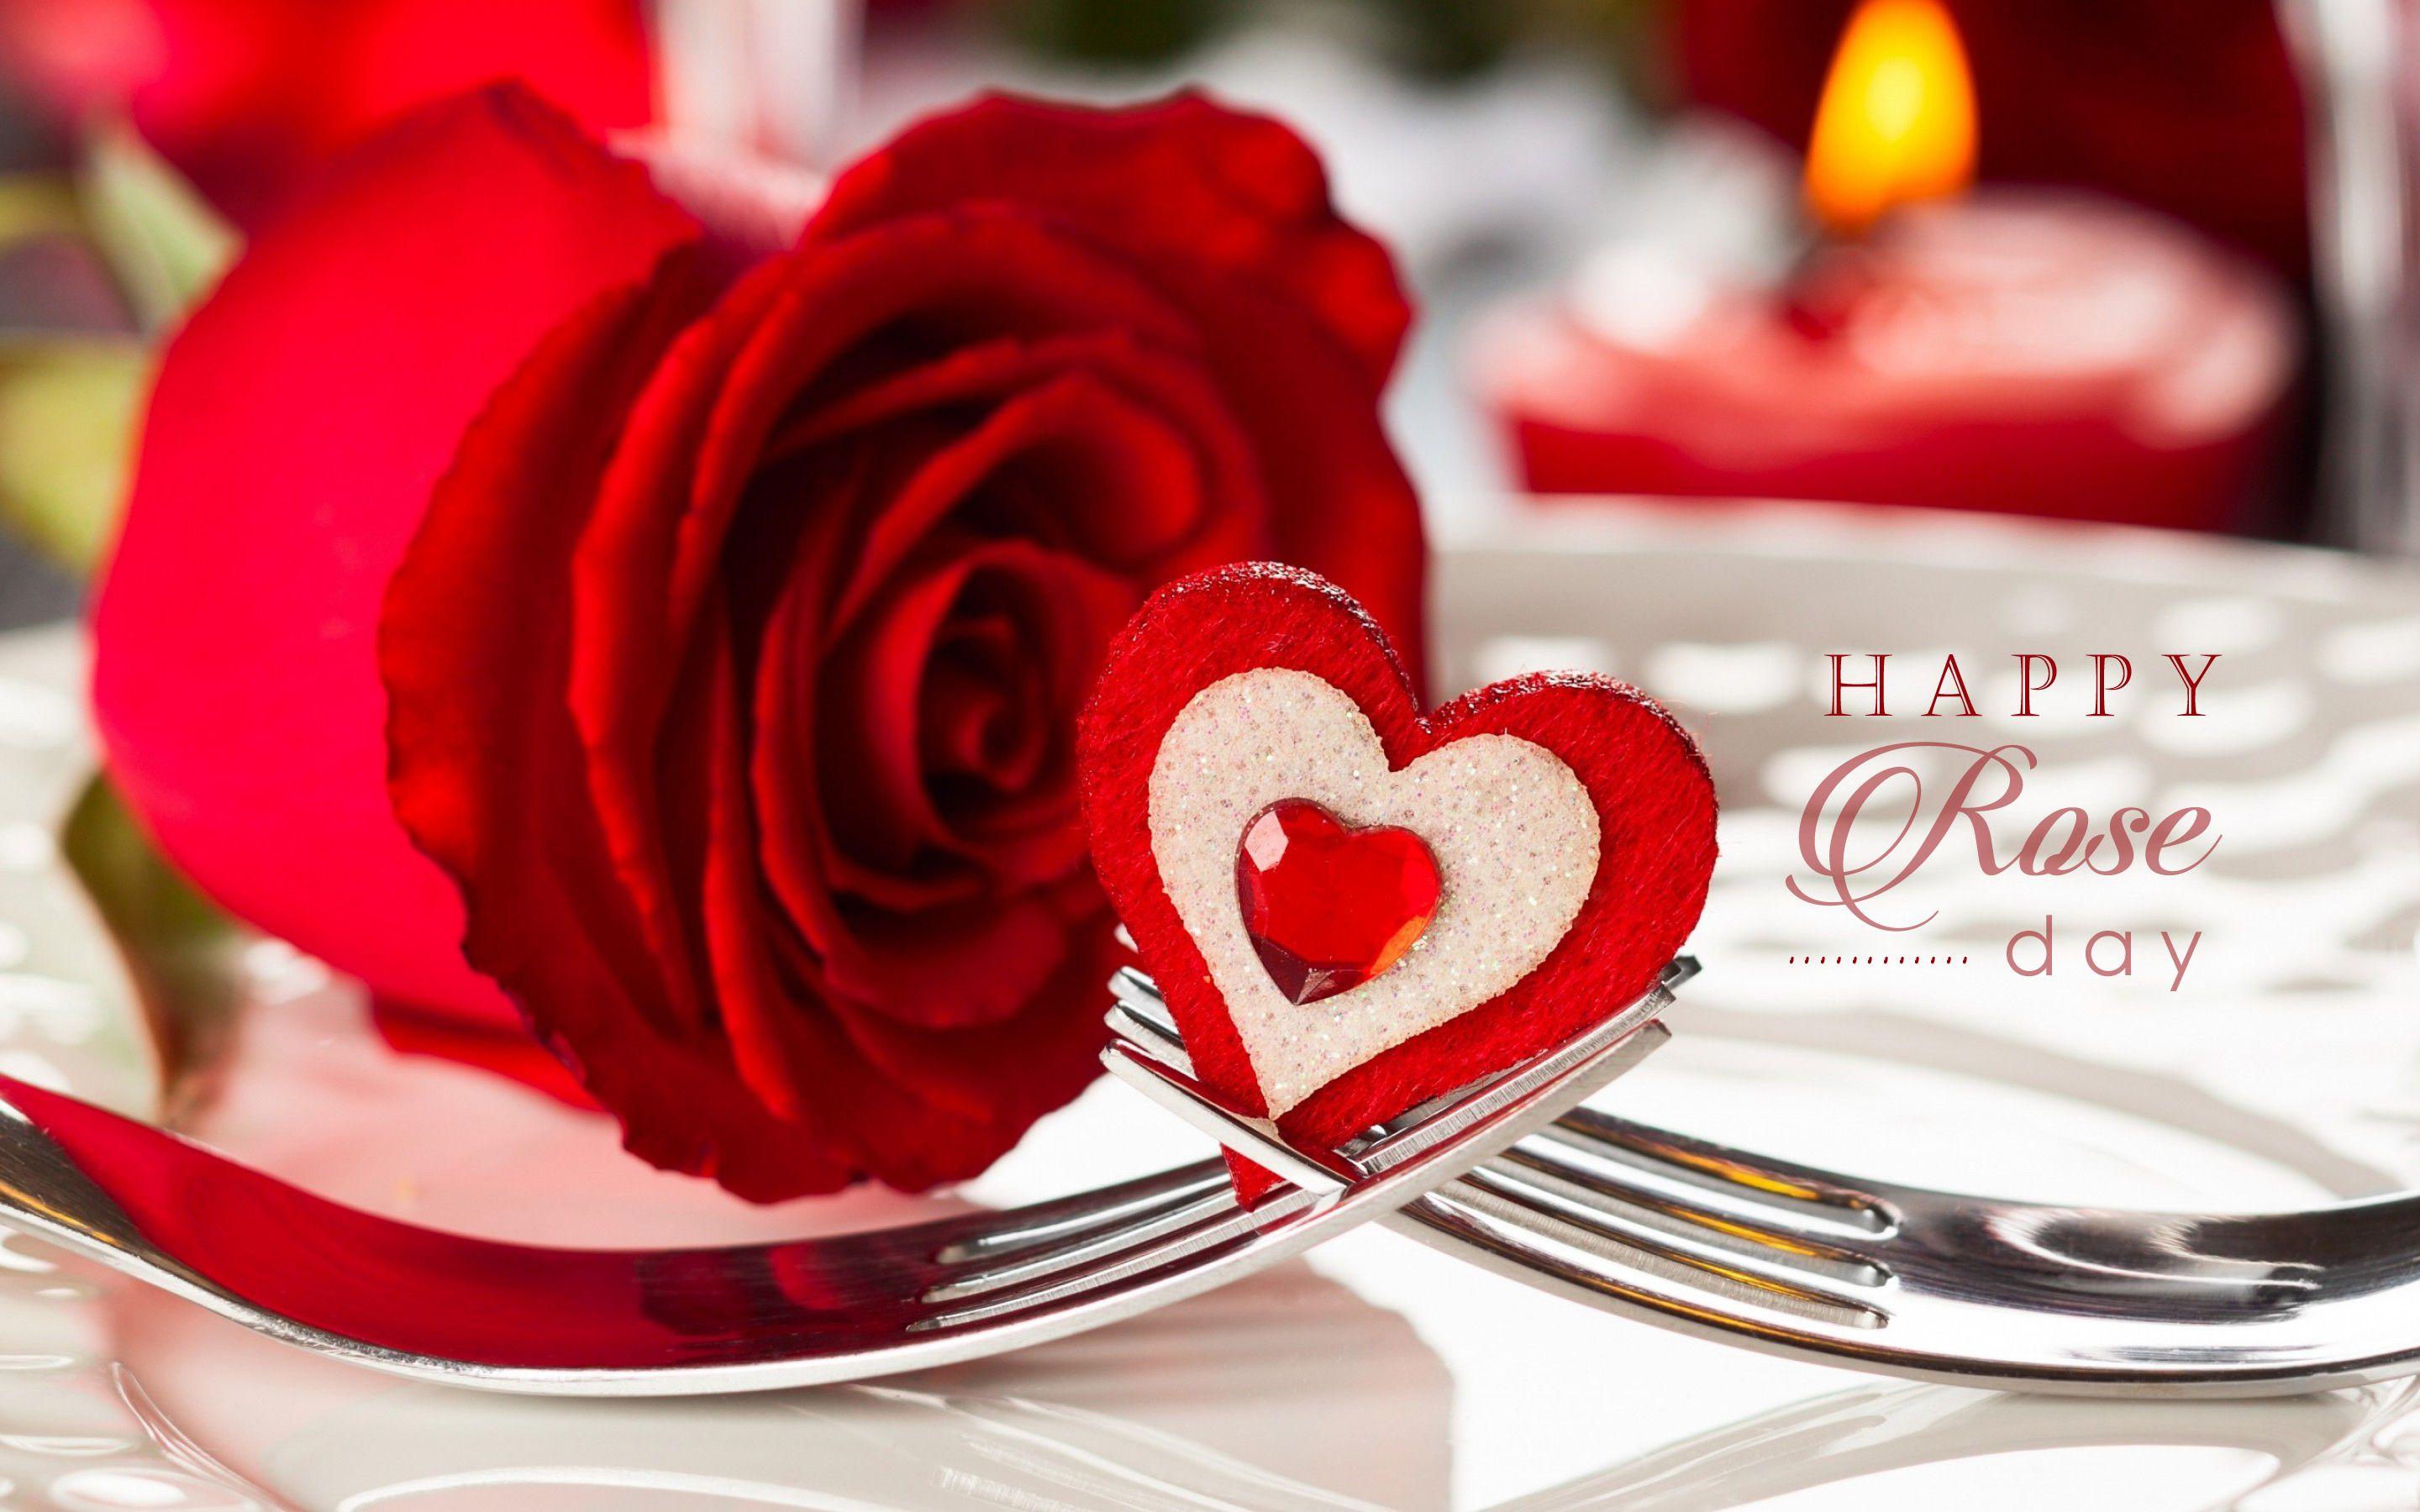 Valentine's Day Romantic Red Roses HD Wallpaper Free